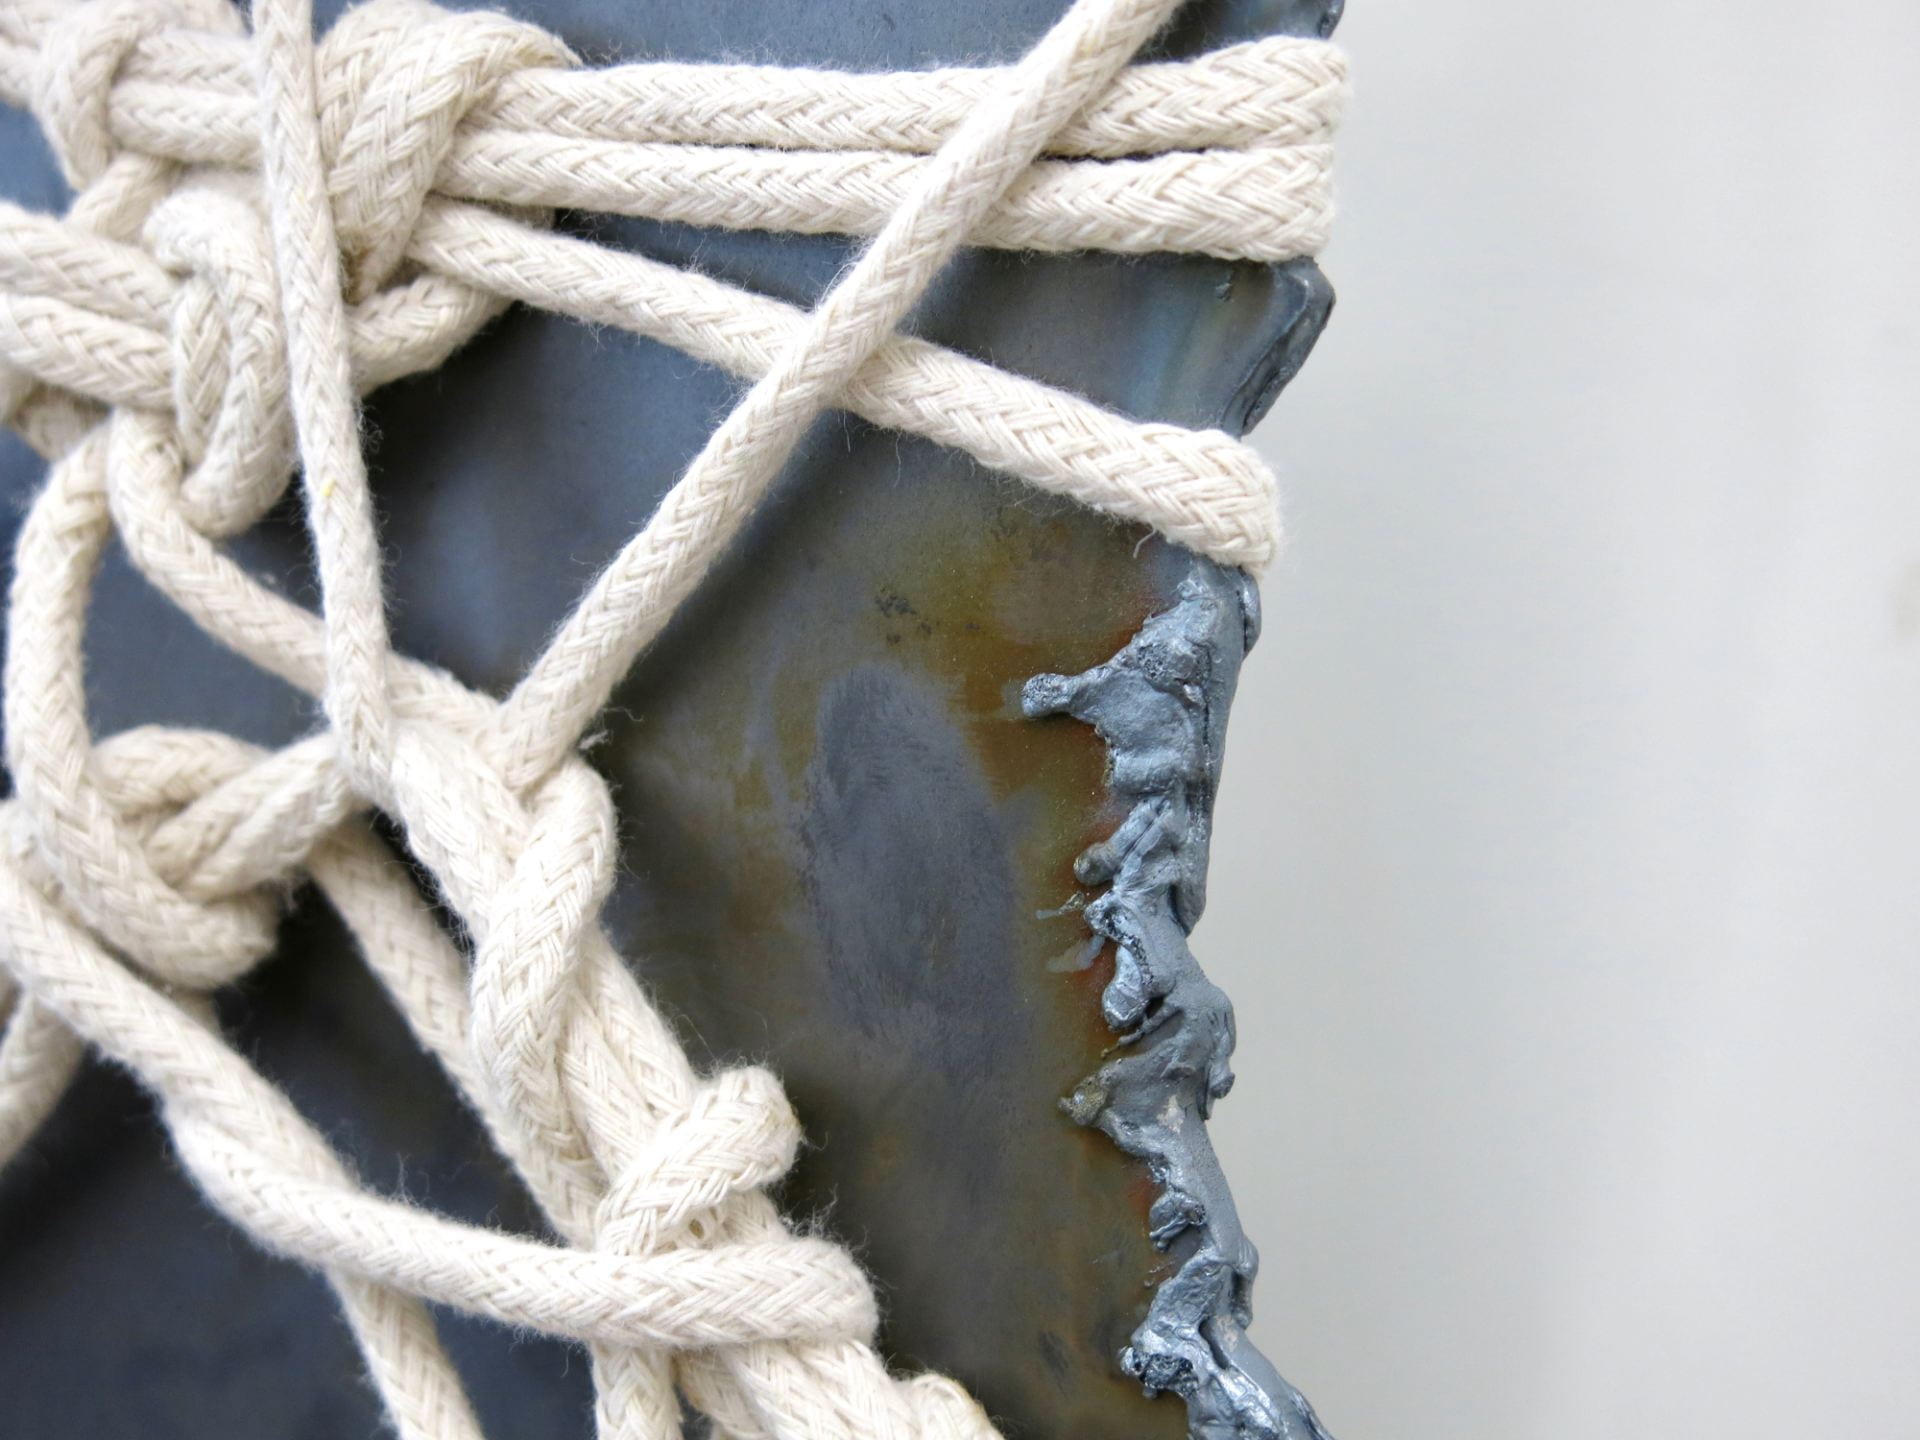 Photograph of melted metal sheet bound with rope